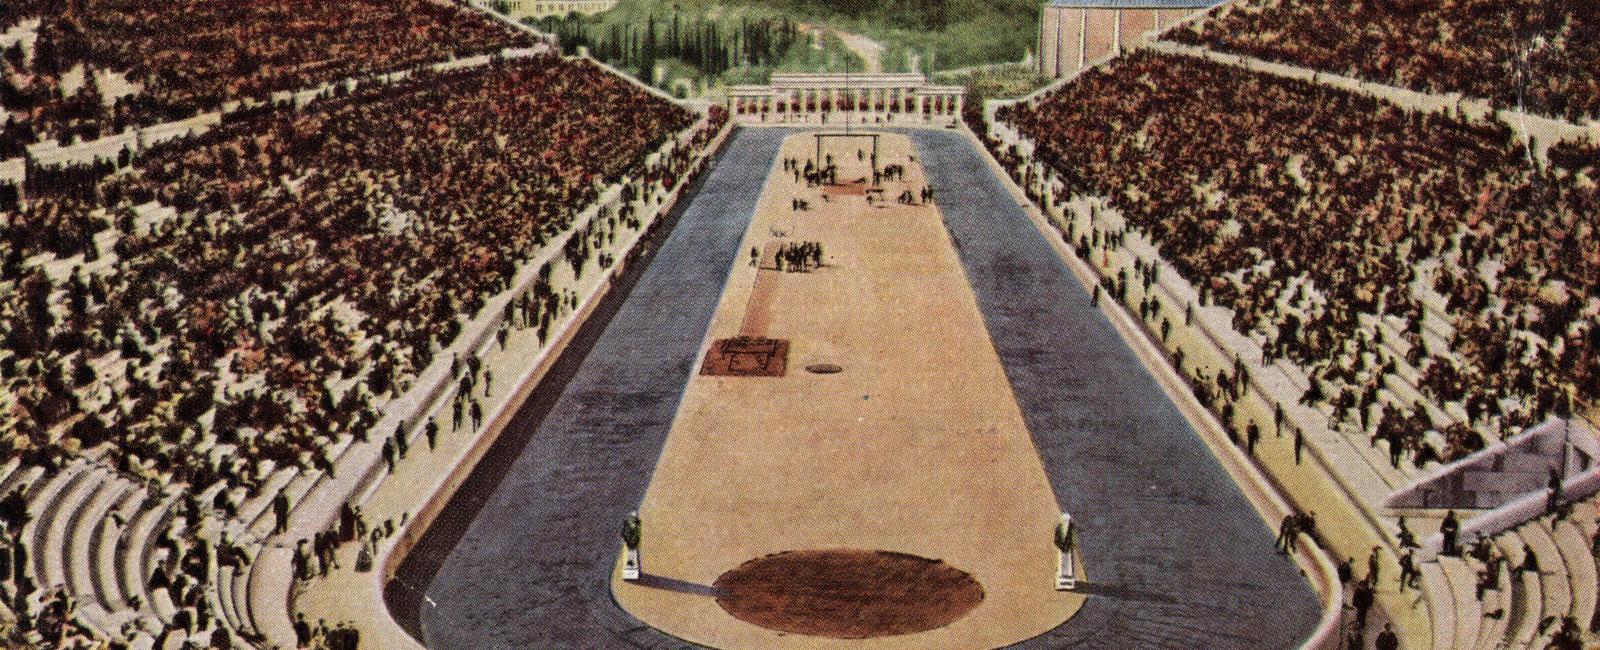 The first modern olympic games were held in athens greece in 1896 there were 311 male but no female competitors